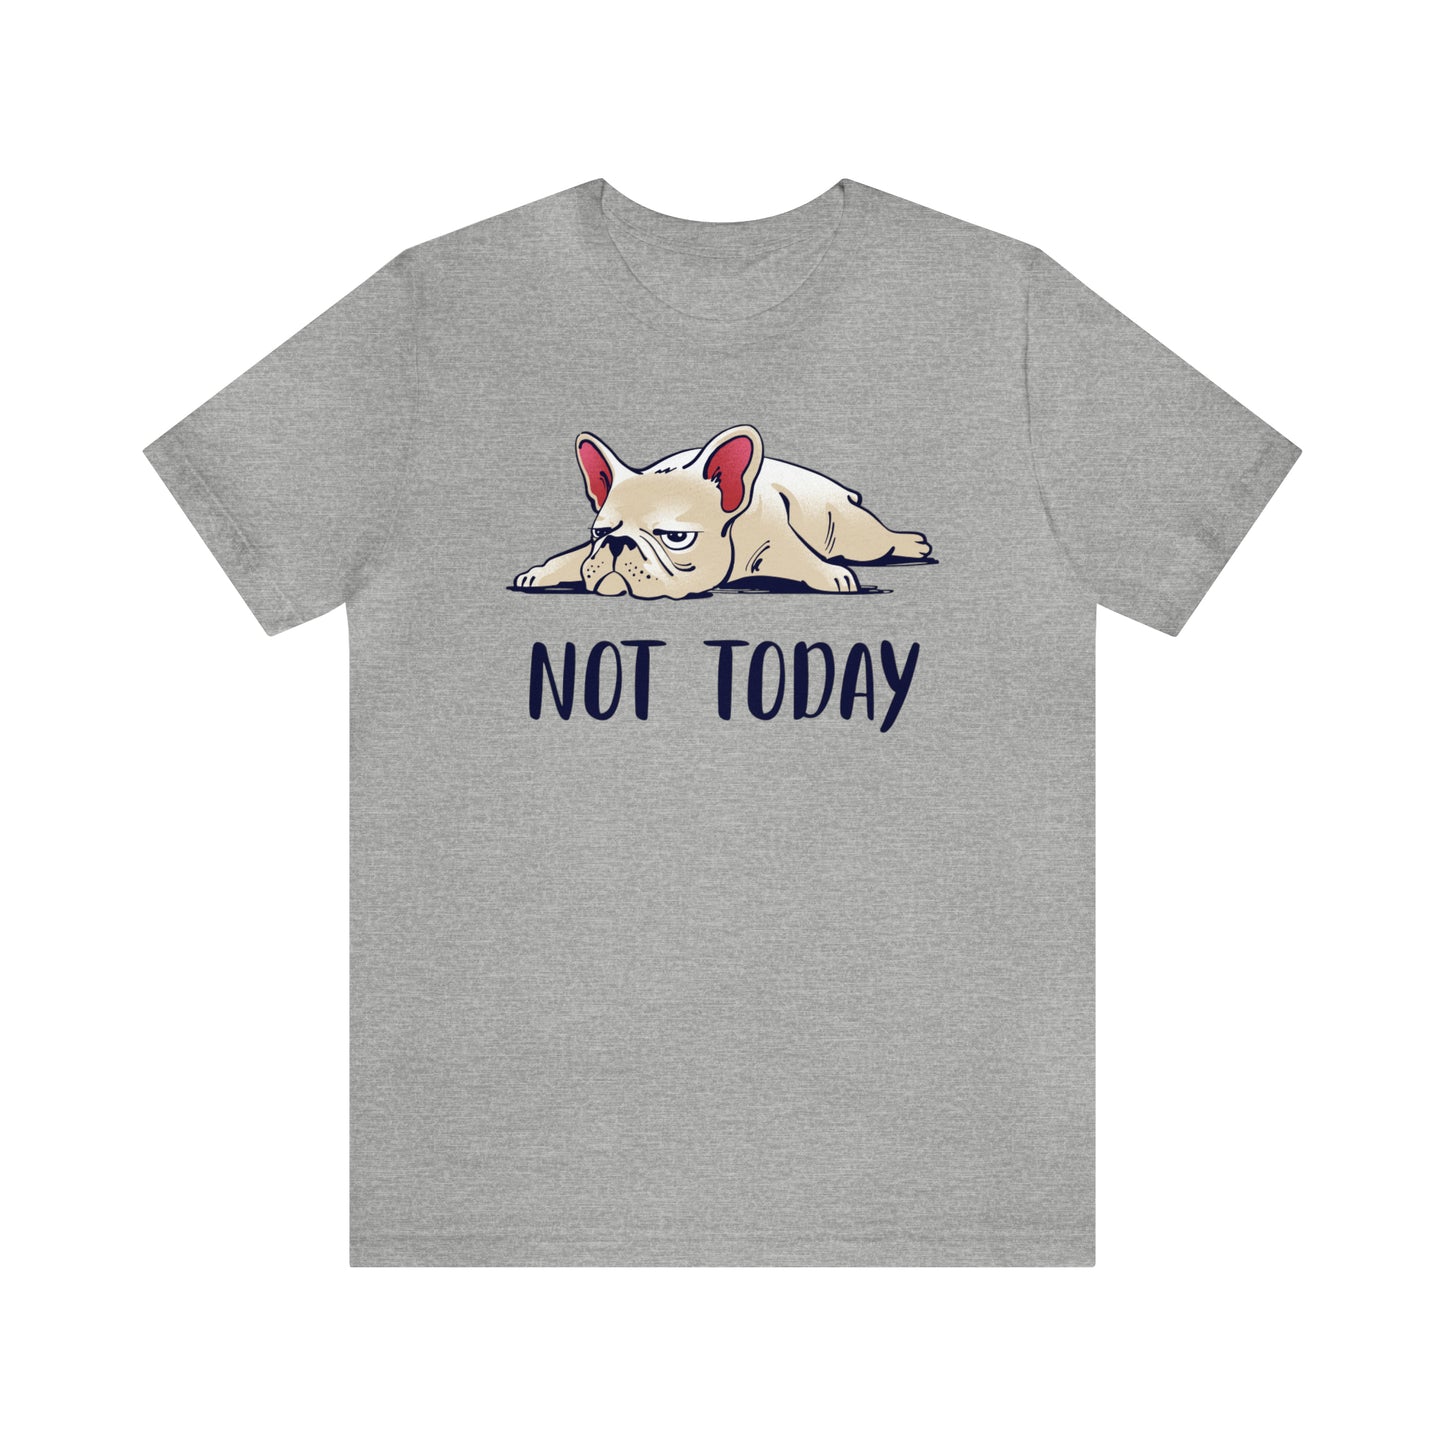 Not Today Graphic Tee